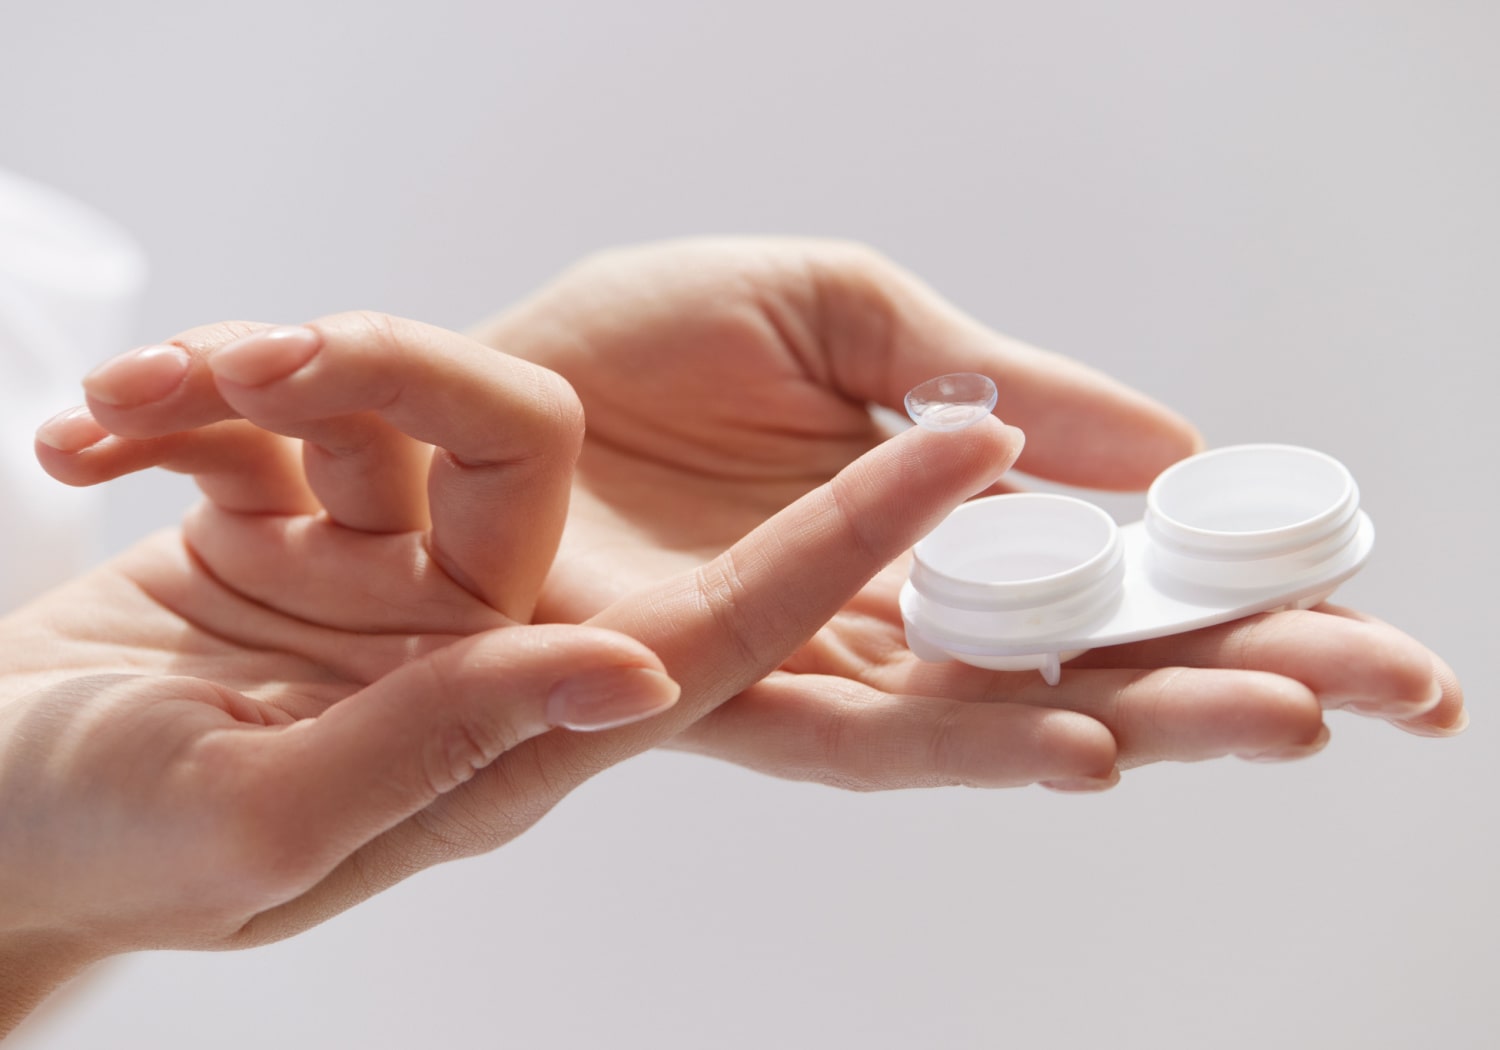 A woman holds a contact lens case in one hand, and she is also holding a contact lens on her index finger.